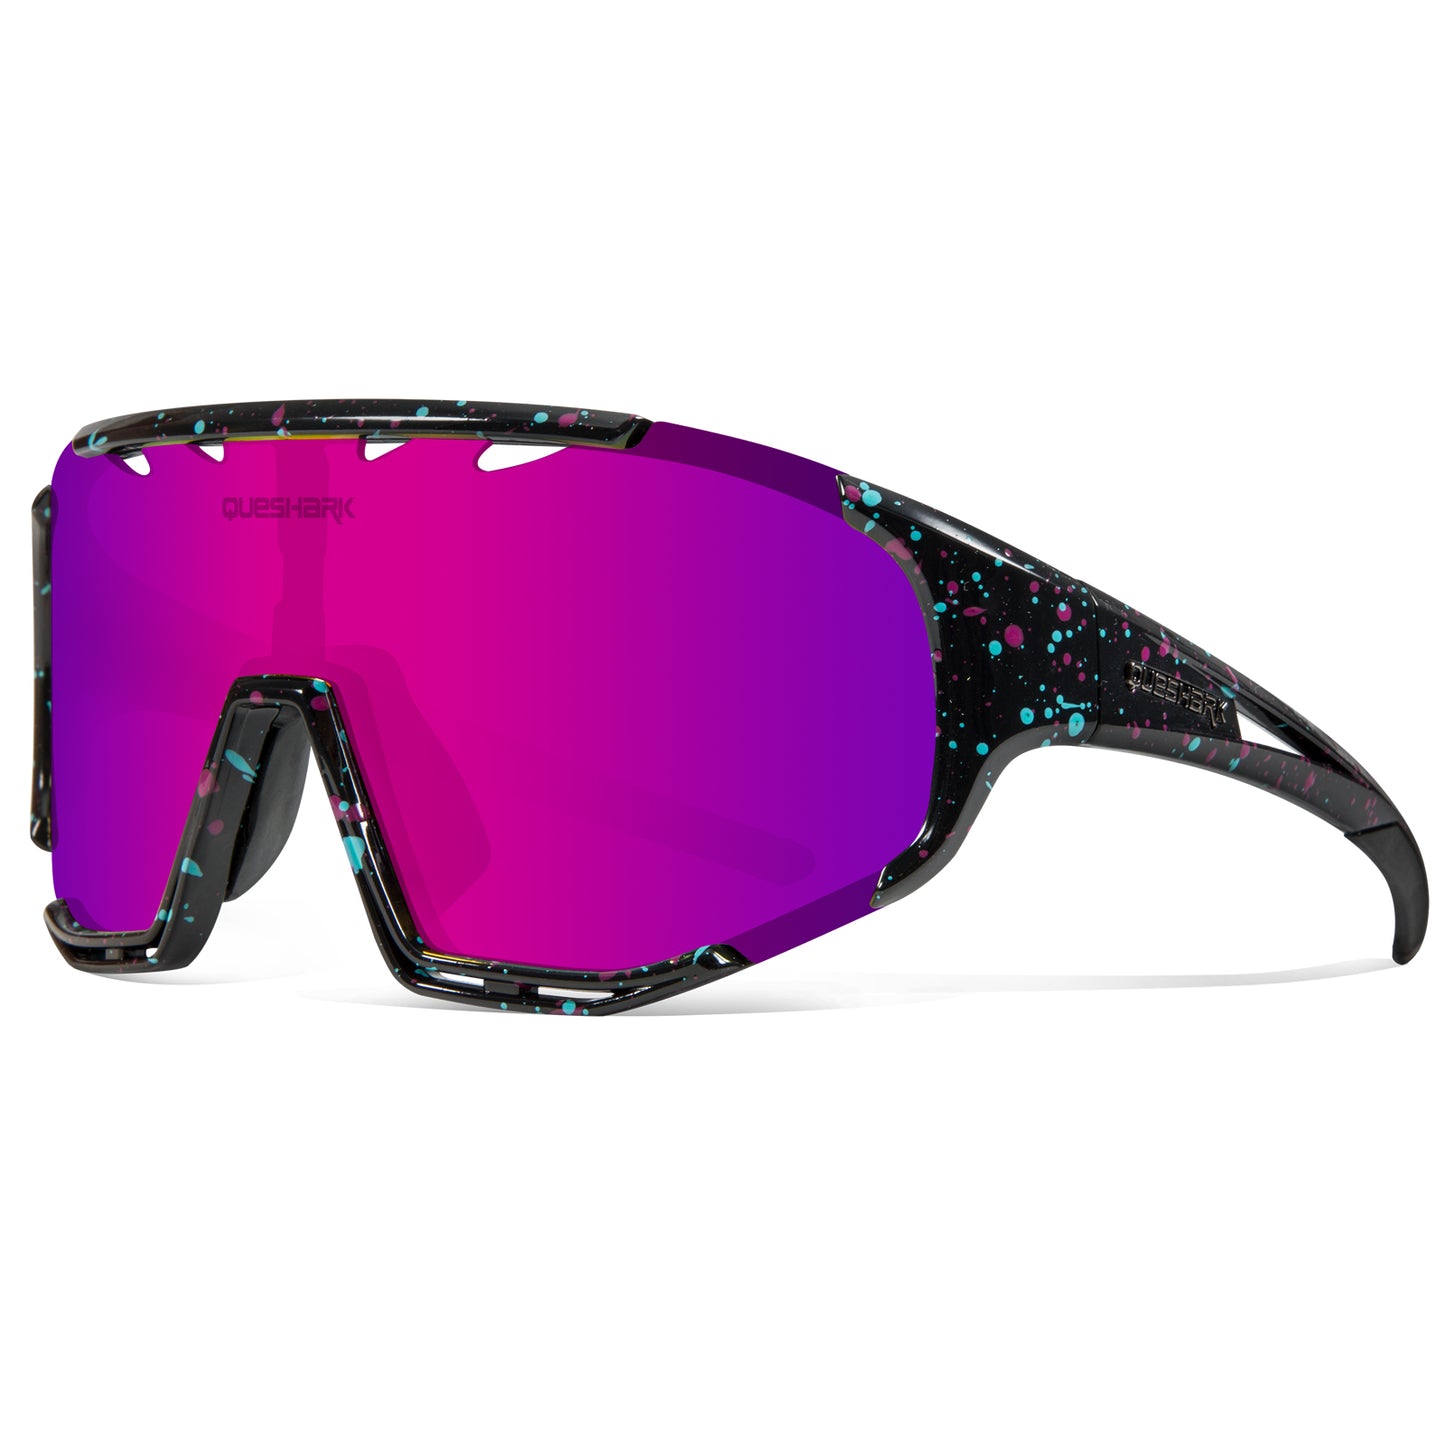 QE55 Starry Sky Pink Polarized Sunglasses Cycling Eyewear Men Women Oversized Driving Glasses with 5 Lens